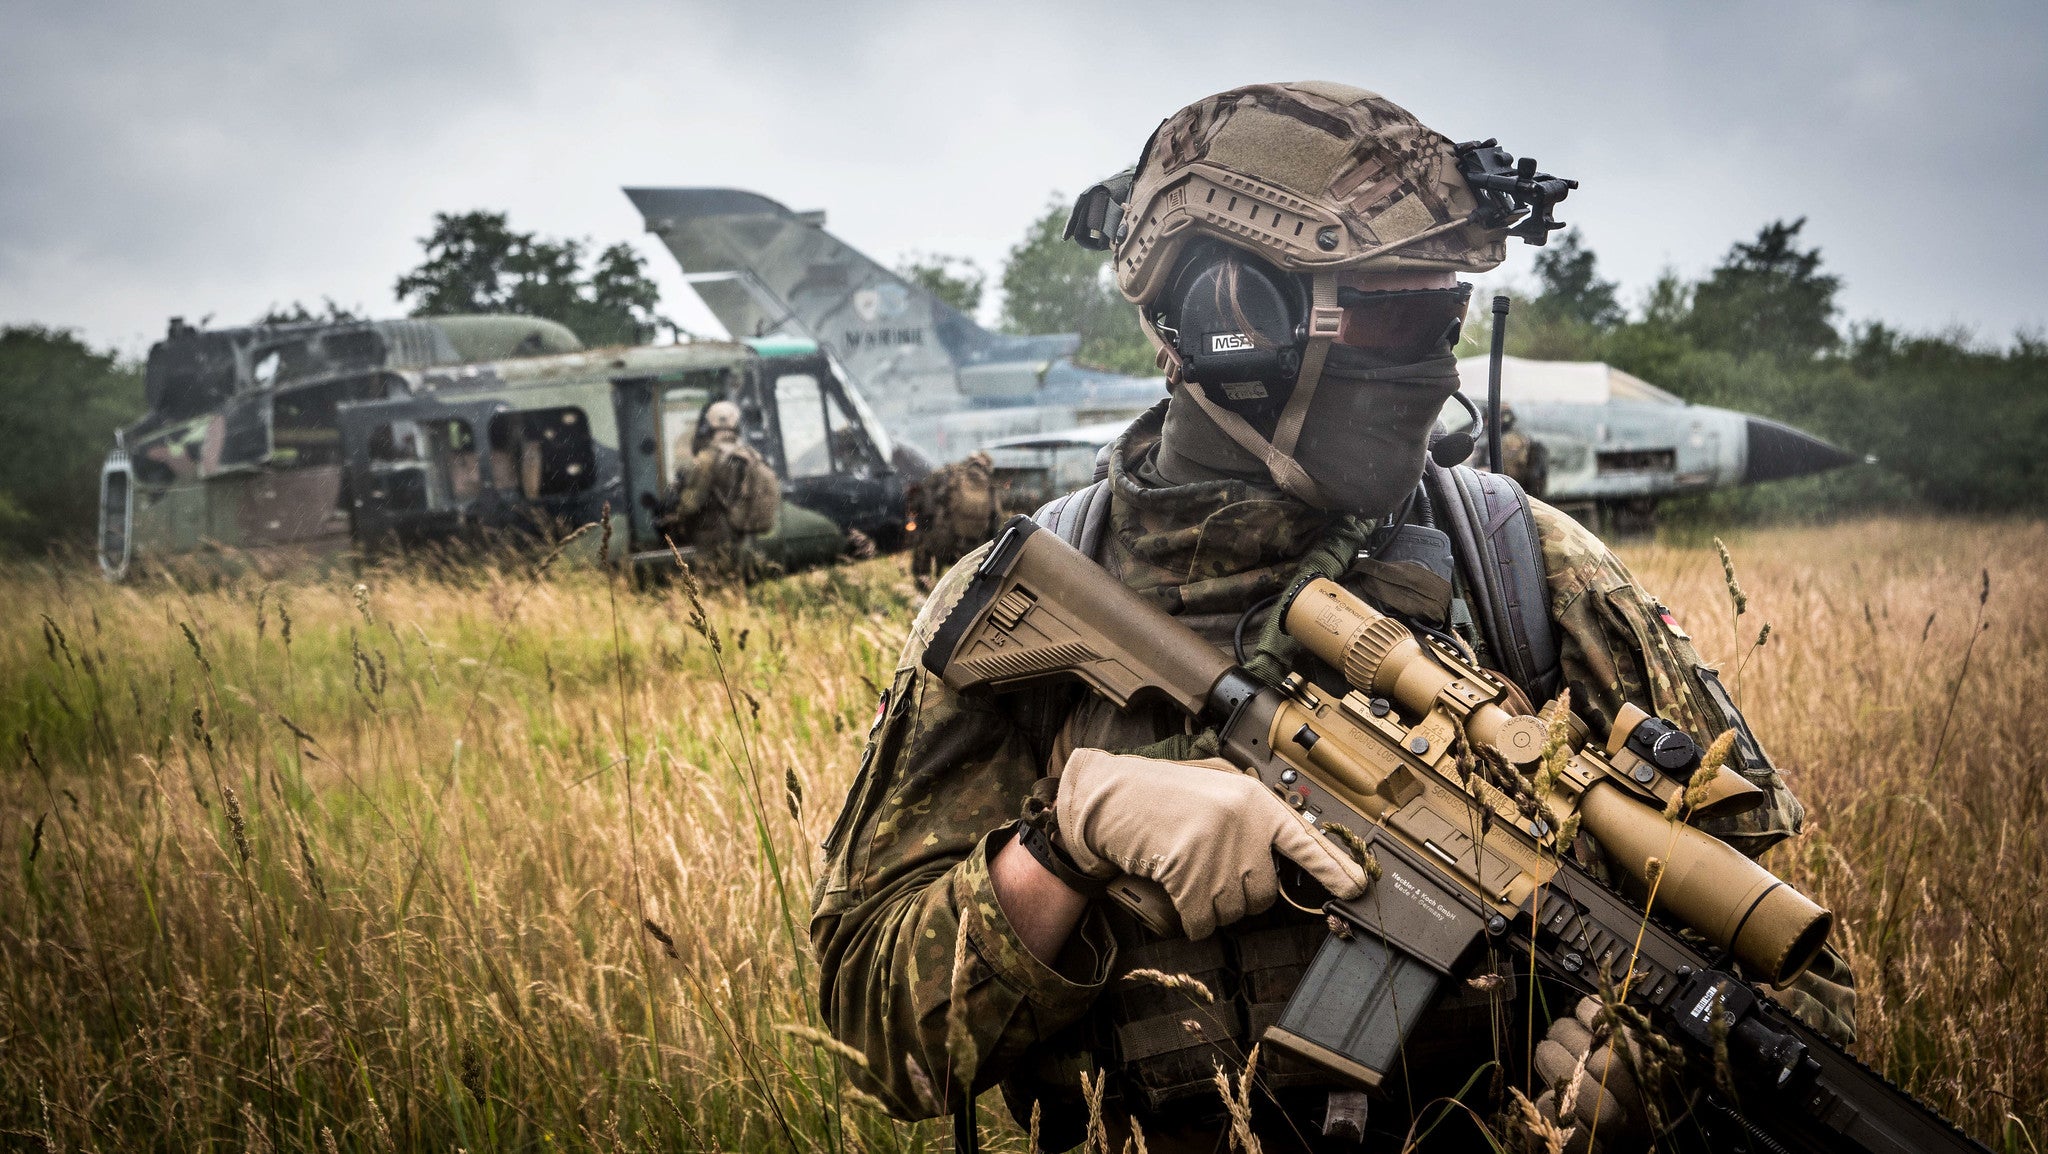 German troops from a special operations unit execute a simulated personnel recovery mission in northern Germany